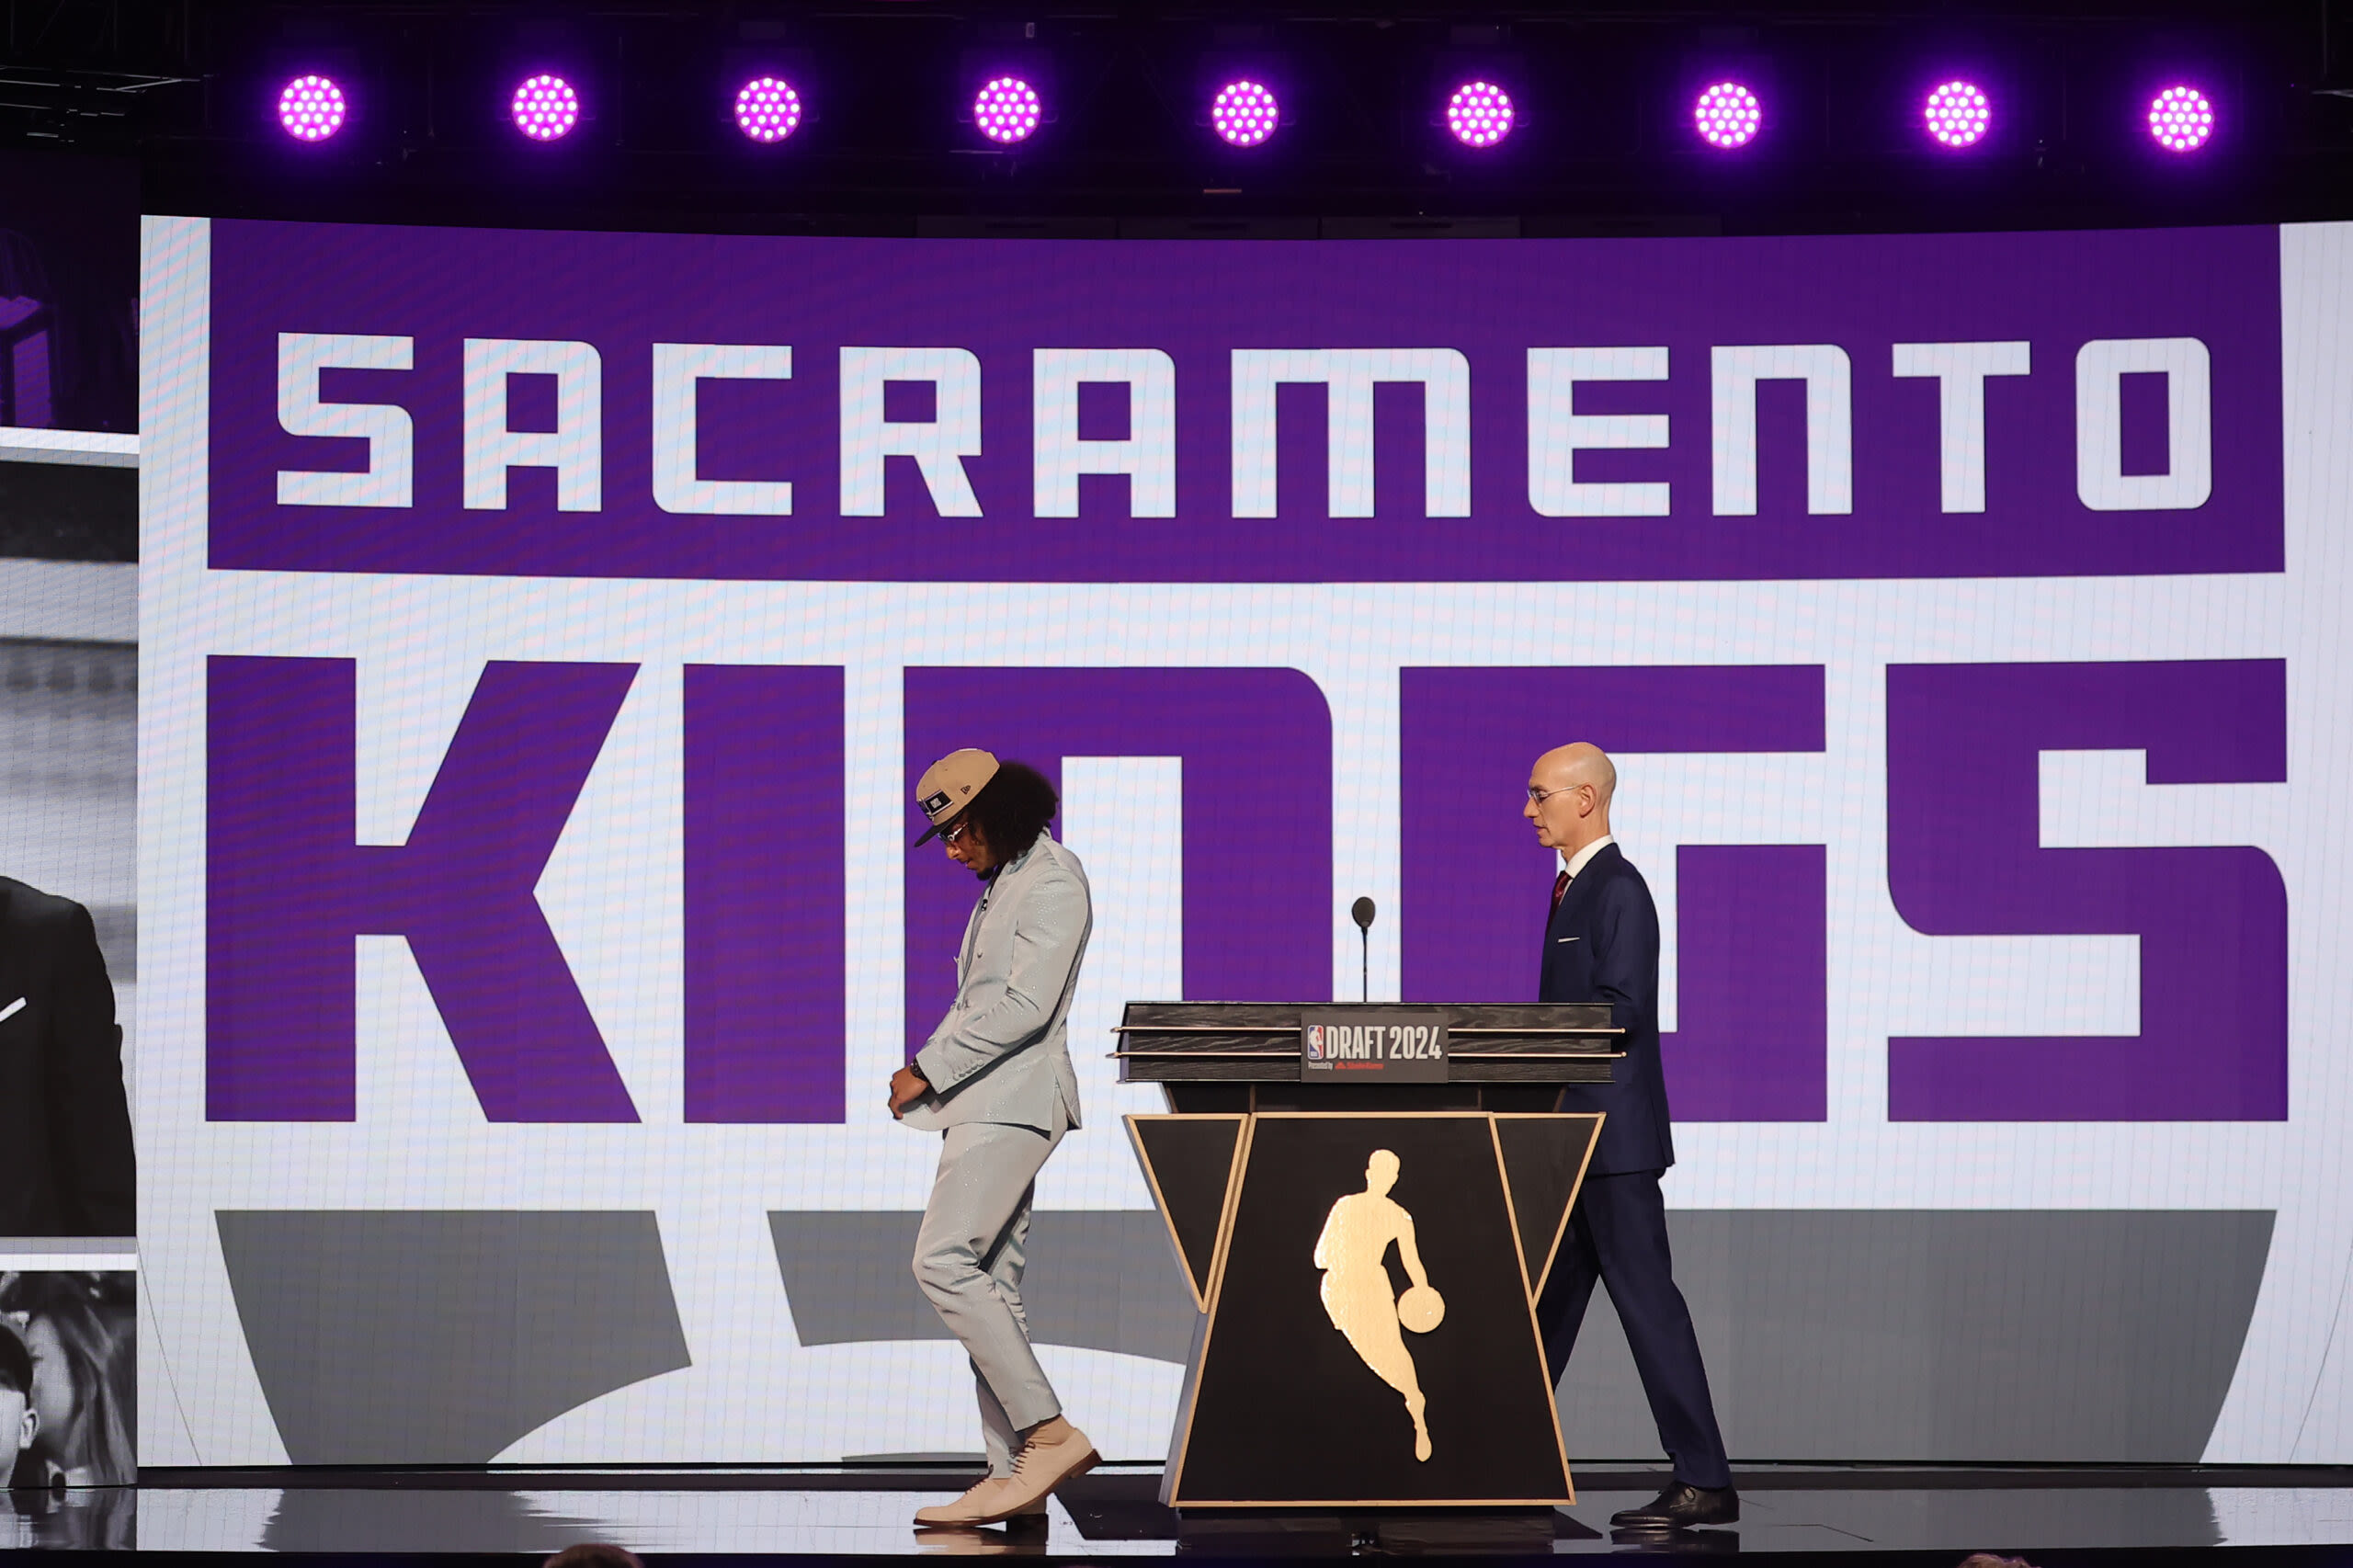 Kings’ Devin Carter is expected to miss 6 months after shoulder surgery